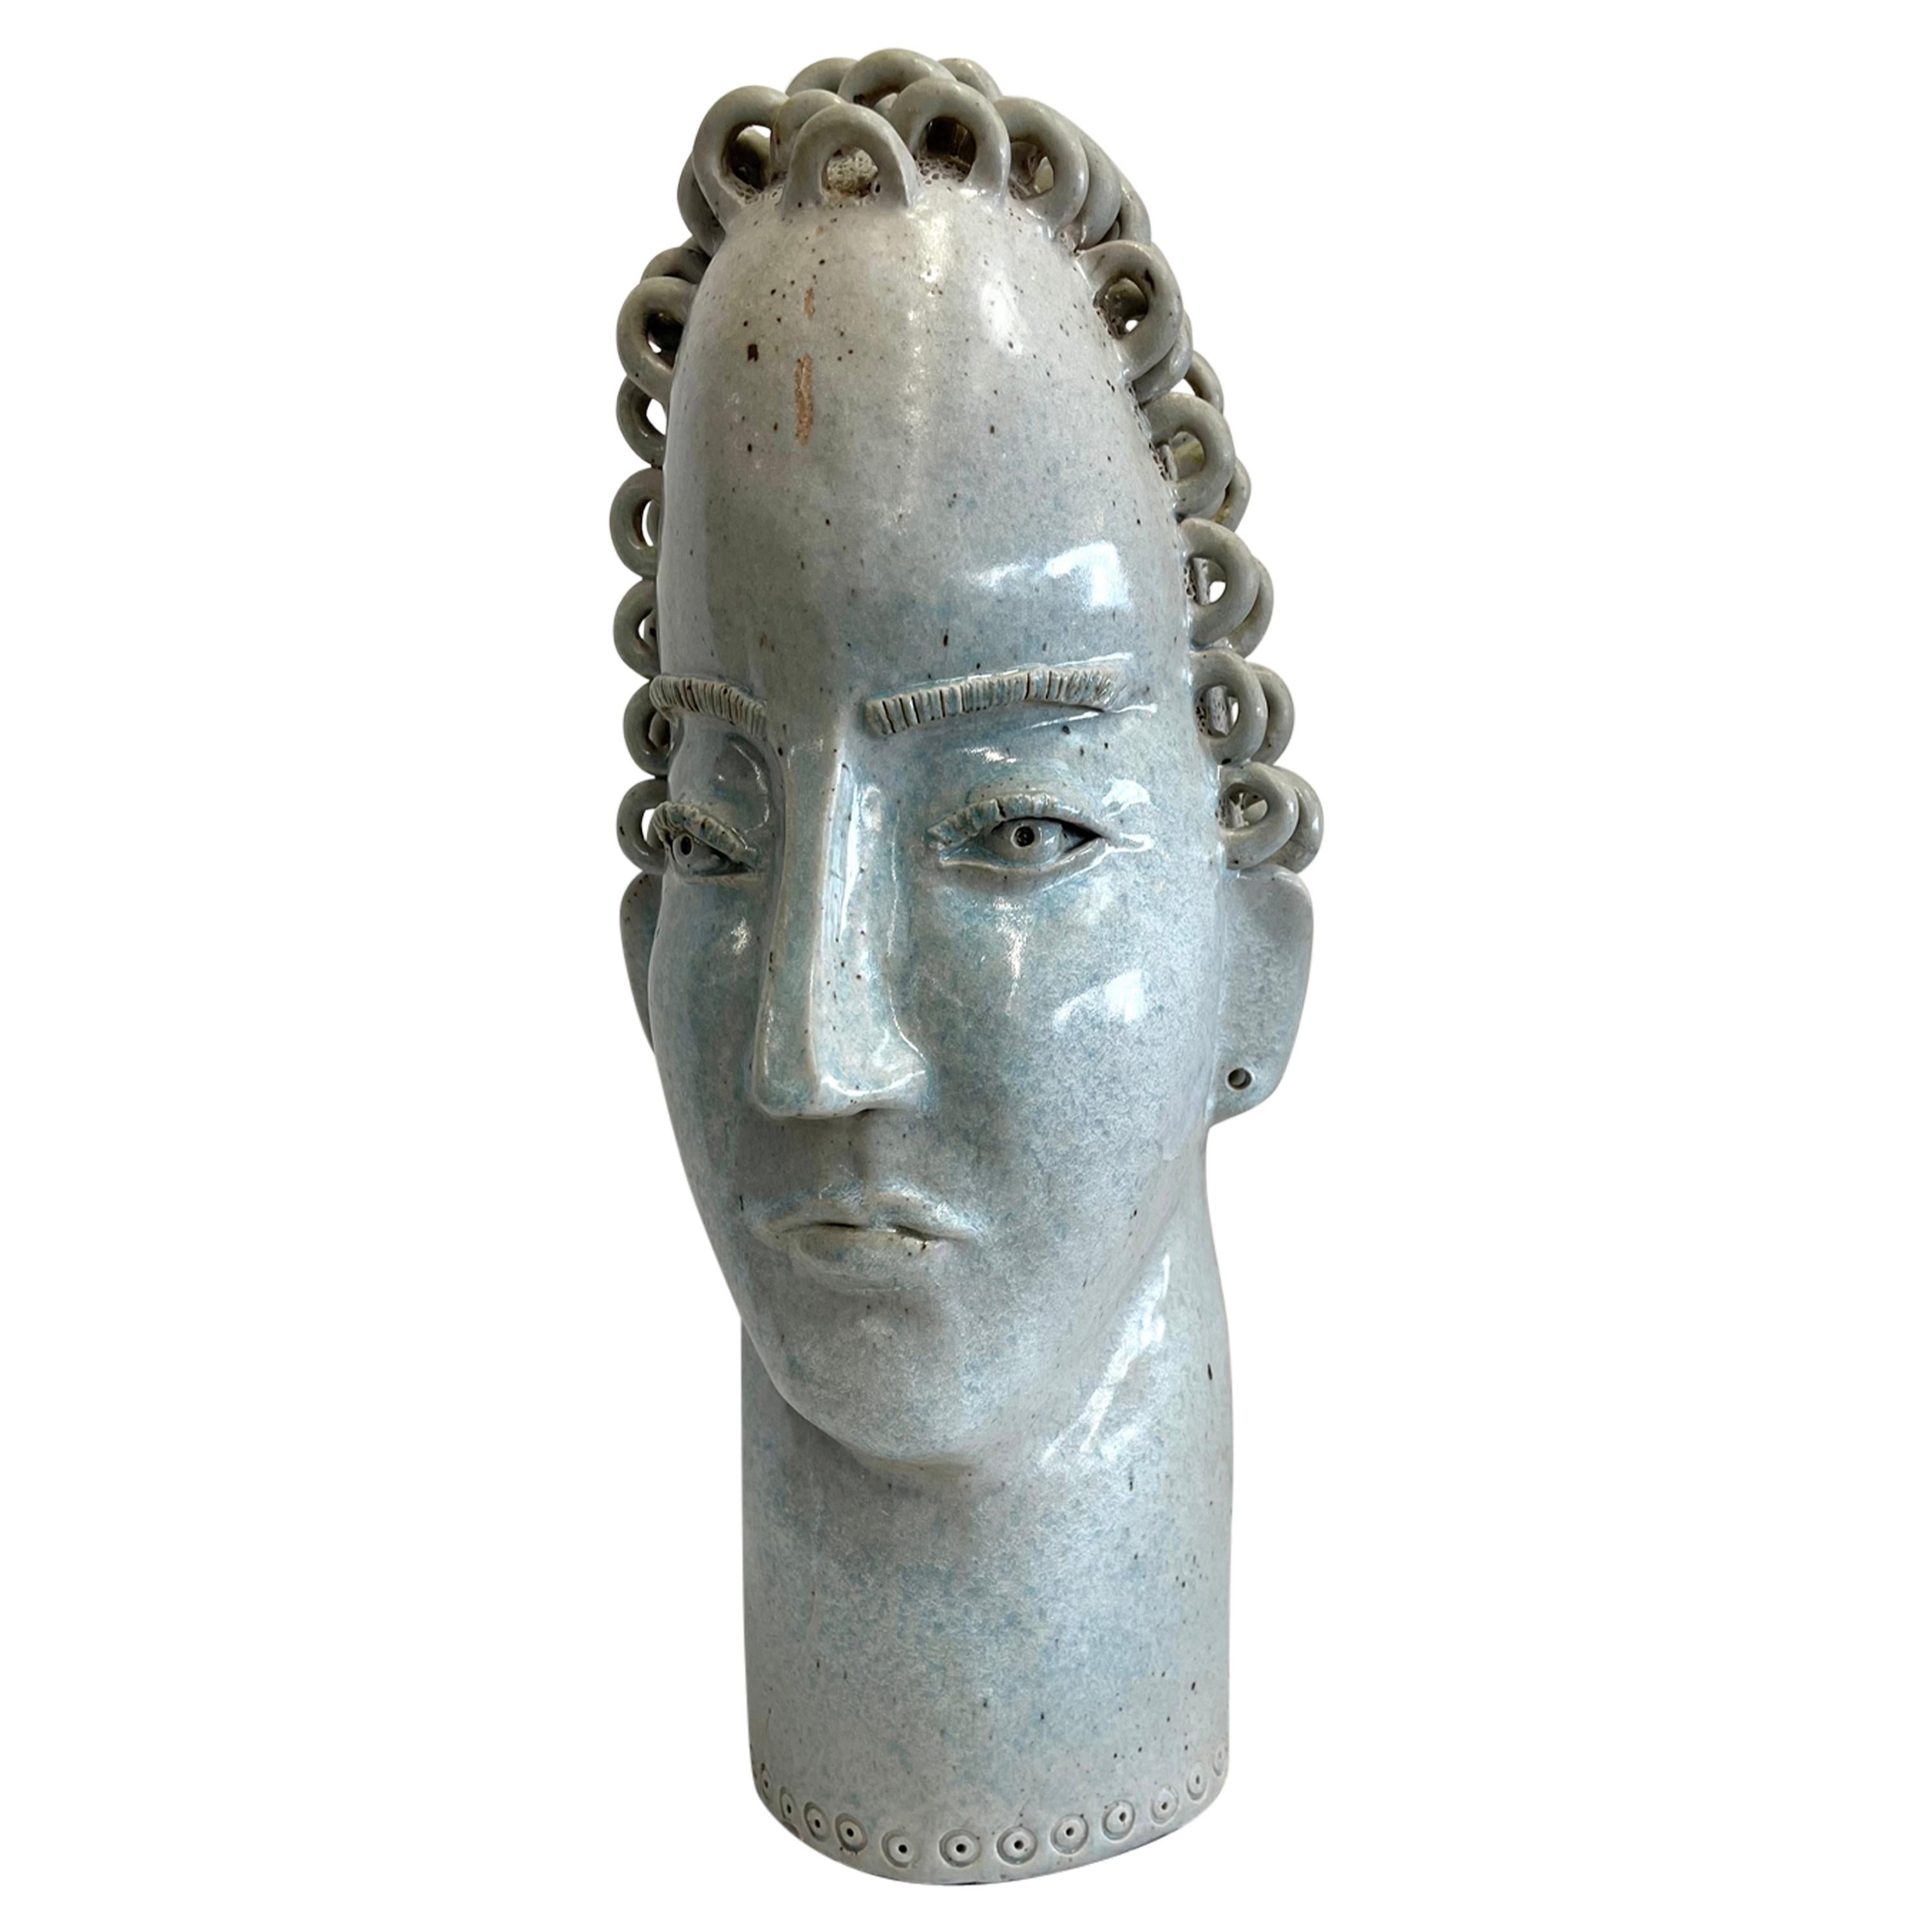 Pottery Bust